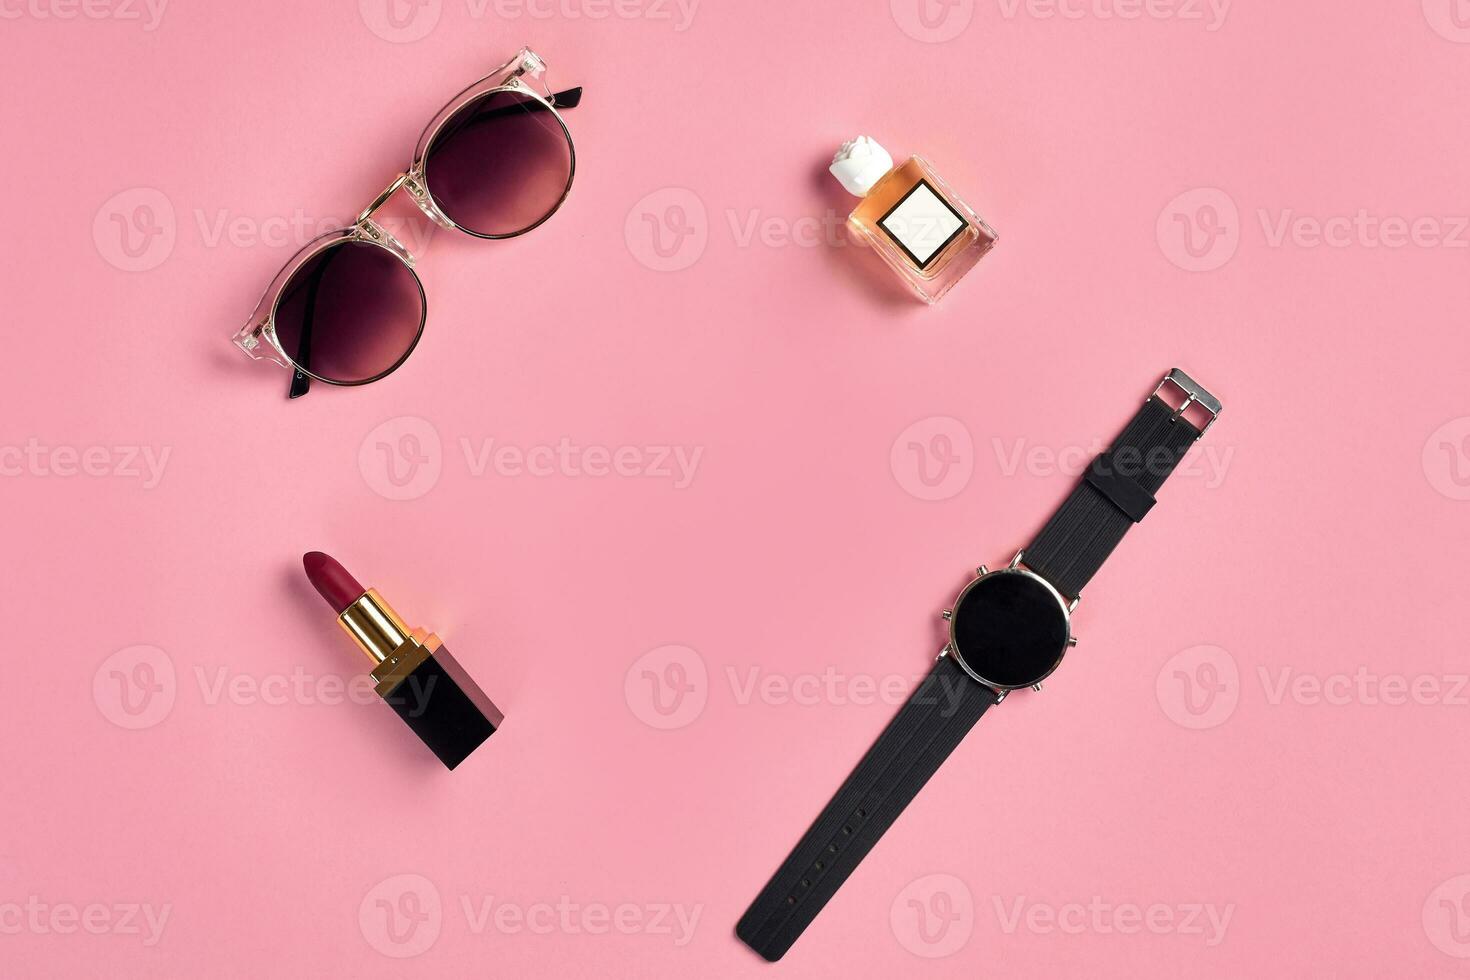 Red lipstick, perfume bottle with blank label, watch with black dial and stylish sunglasses against pink background. Close up, copy space photo